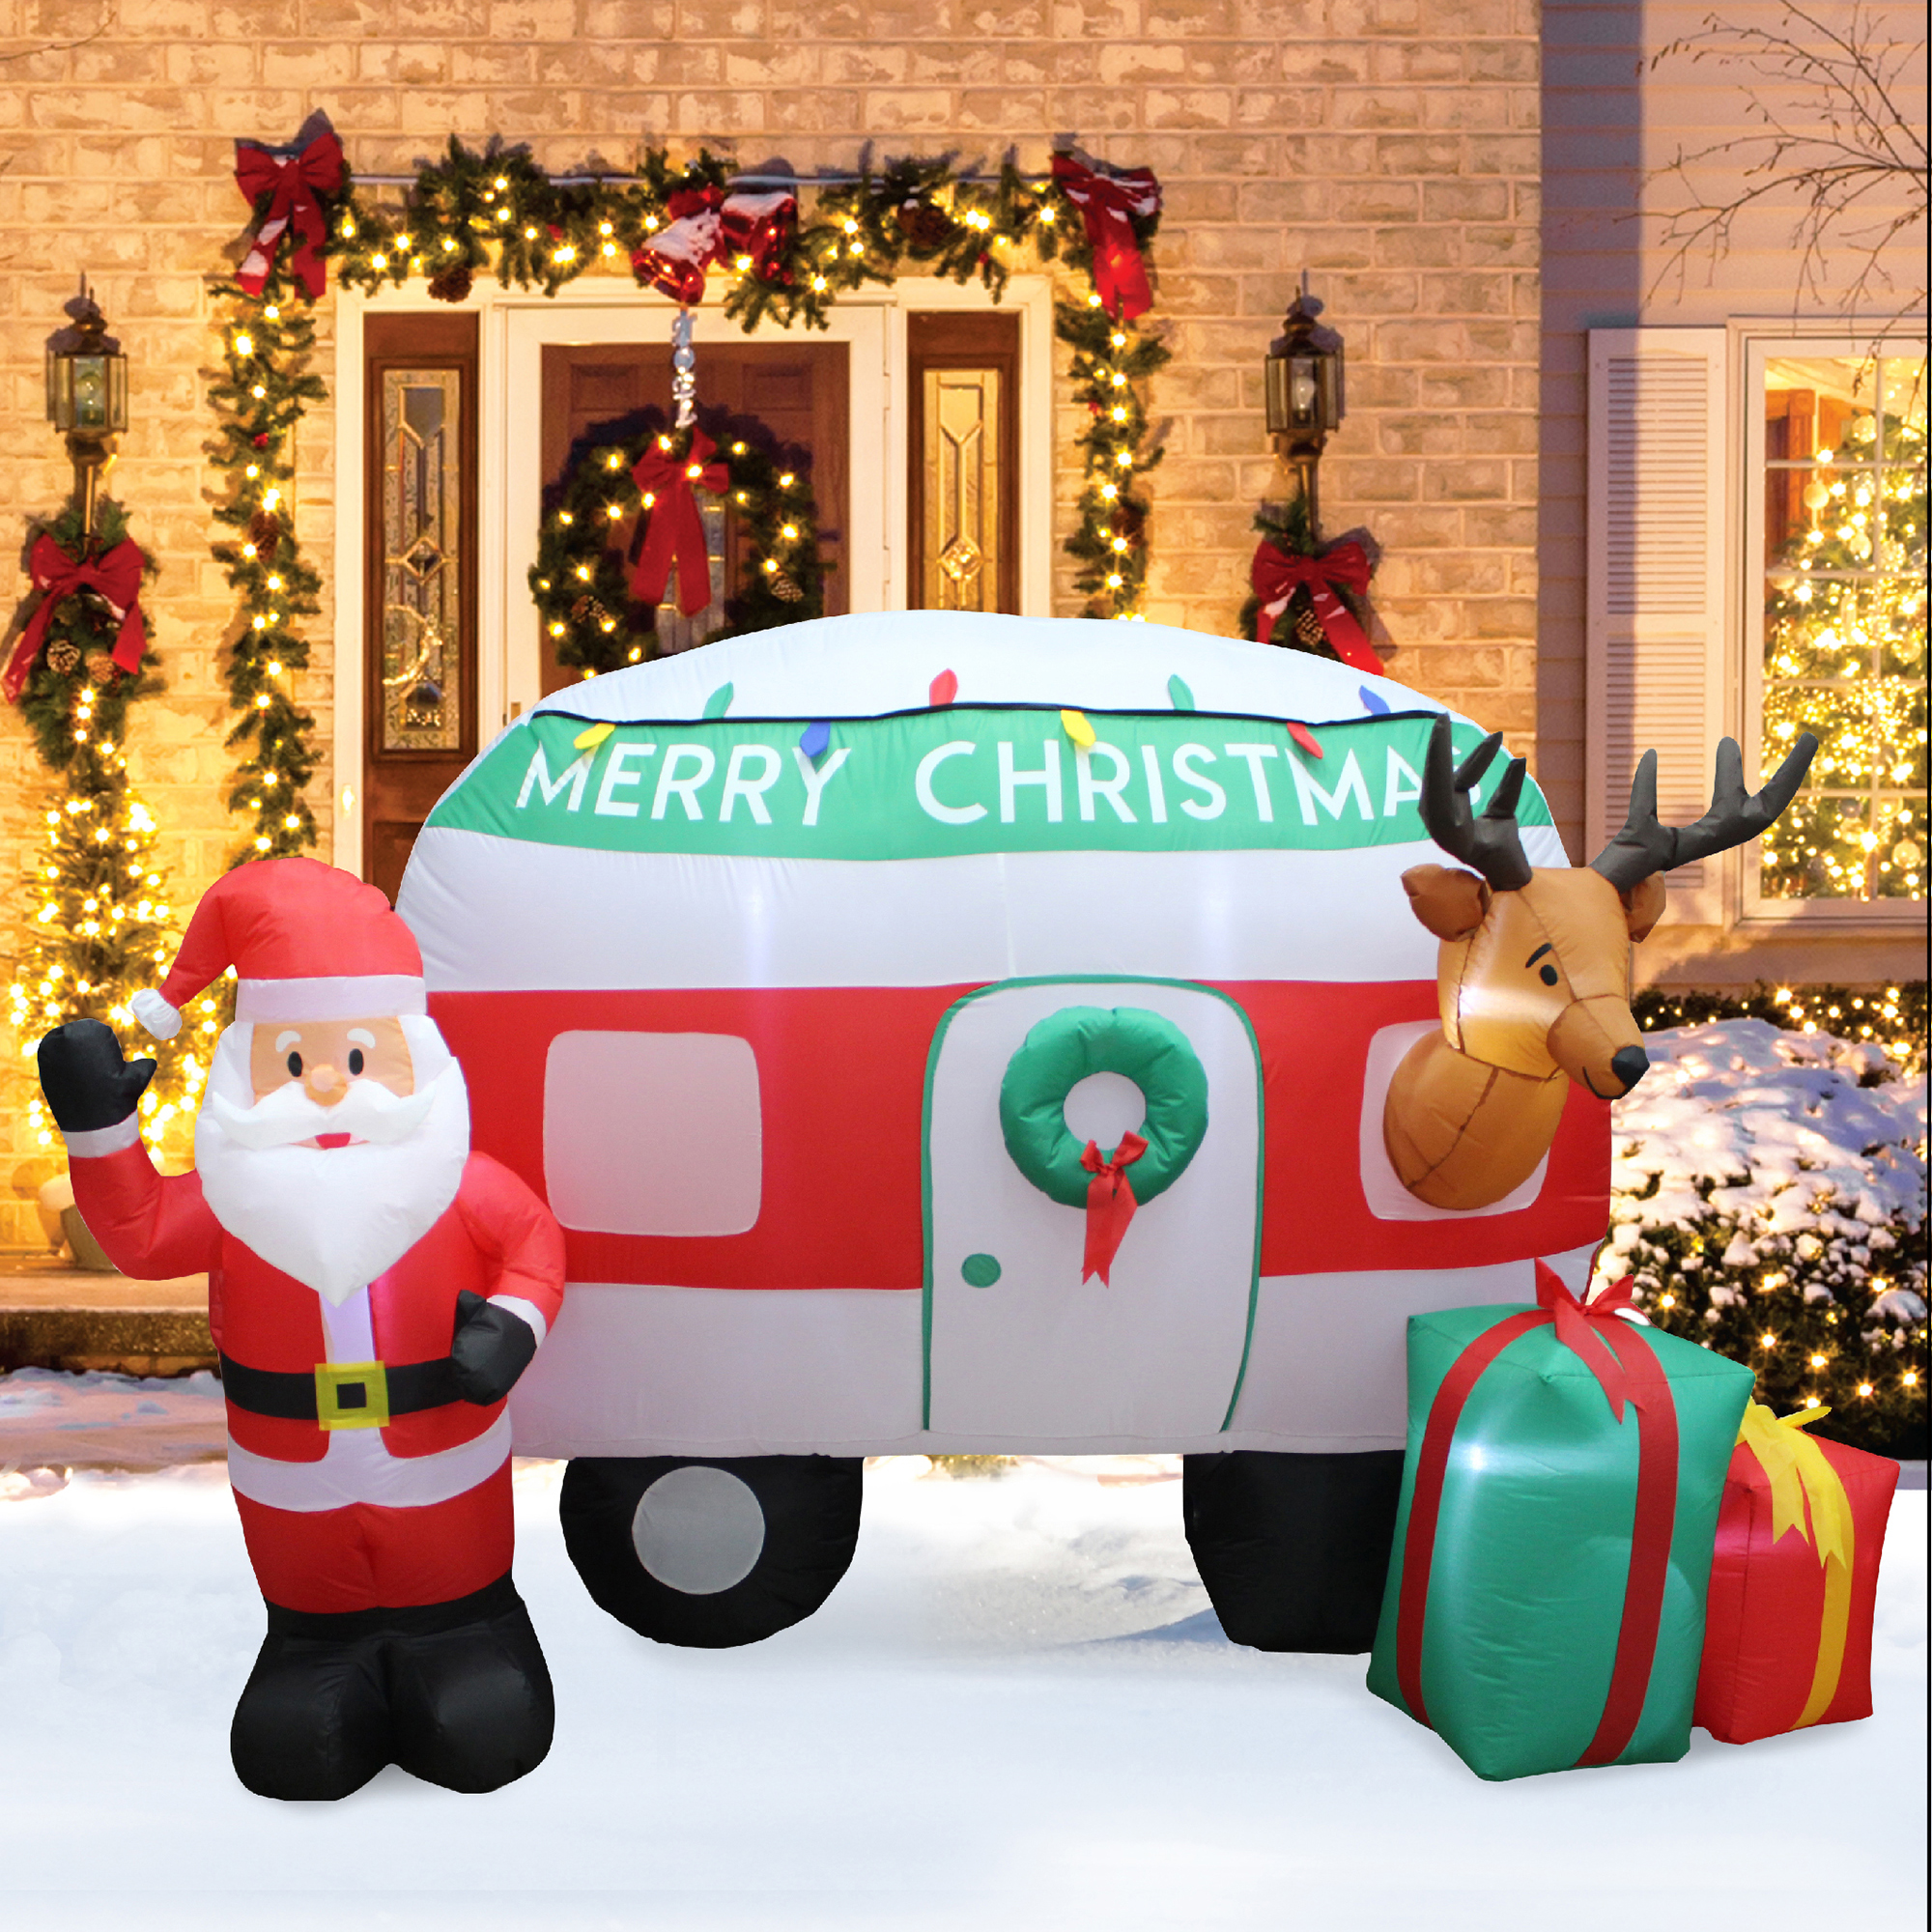 Seasonal Creations 8 Ft Wide Inflatable Christmas Camper Holiday Lawn